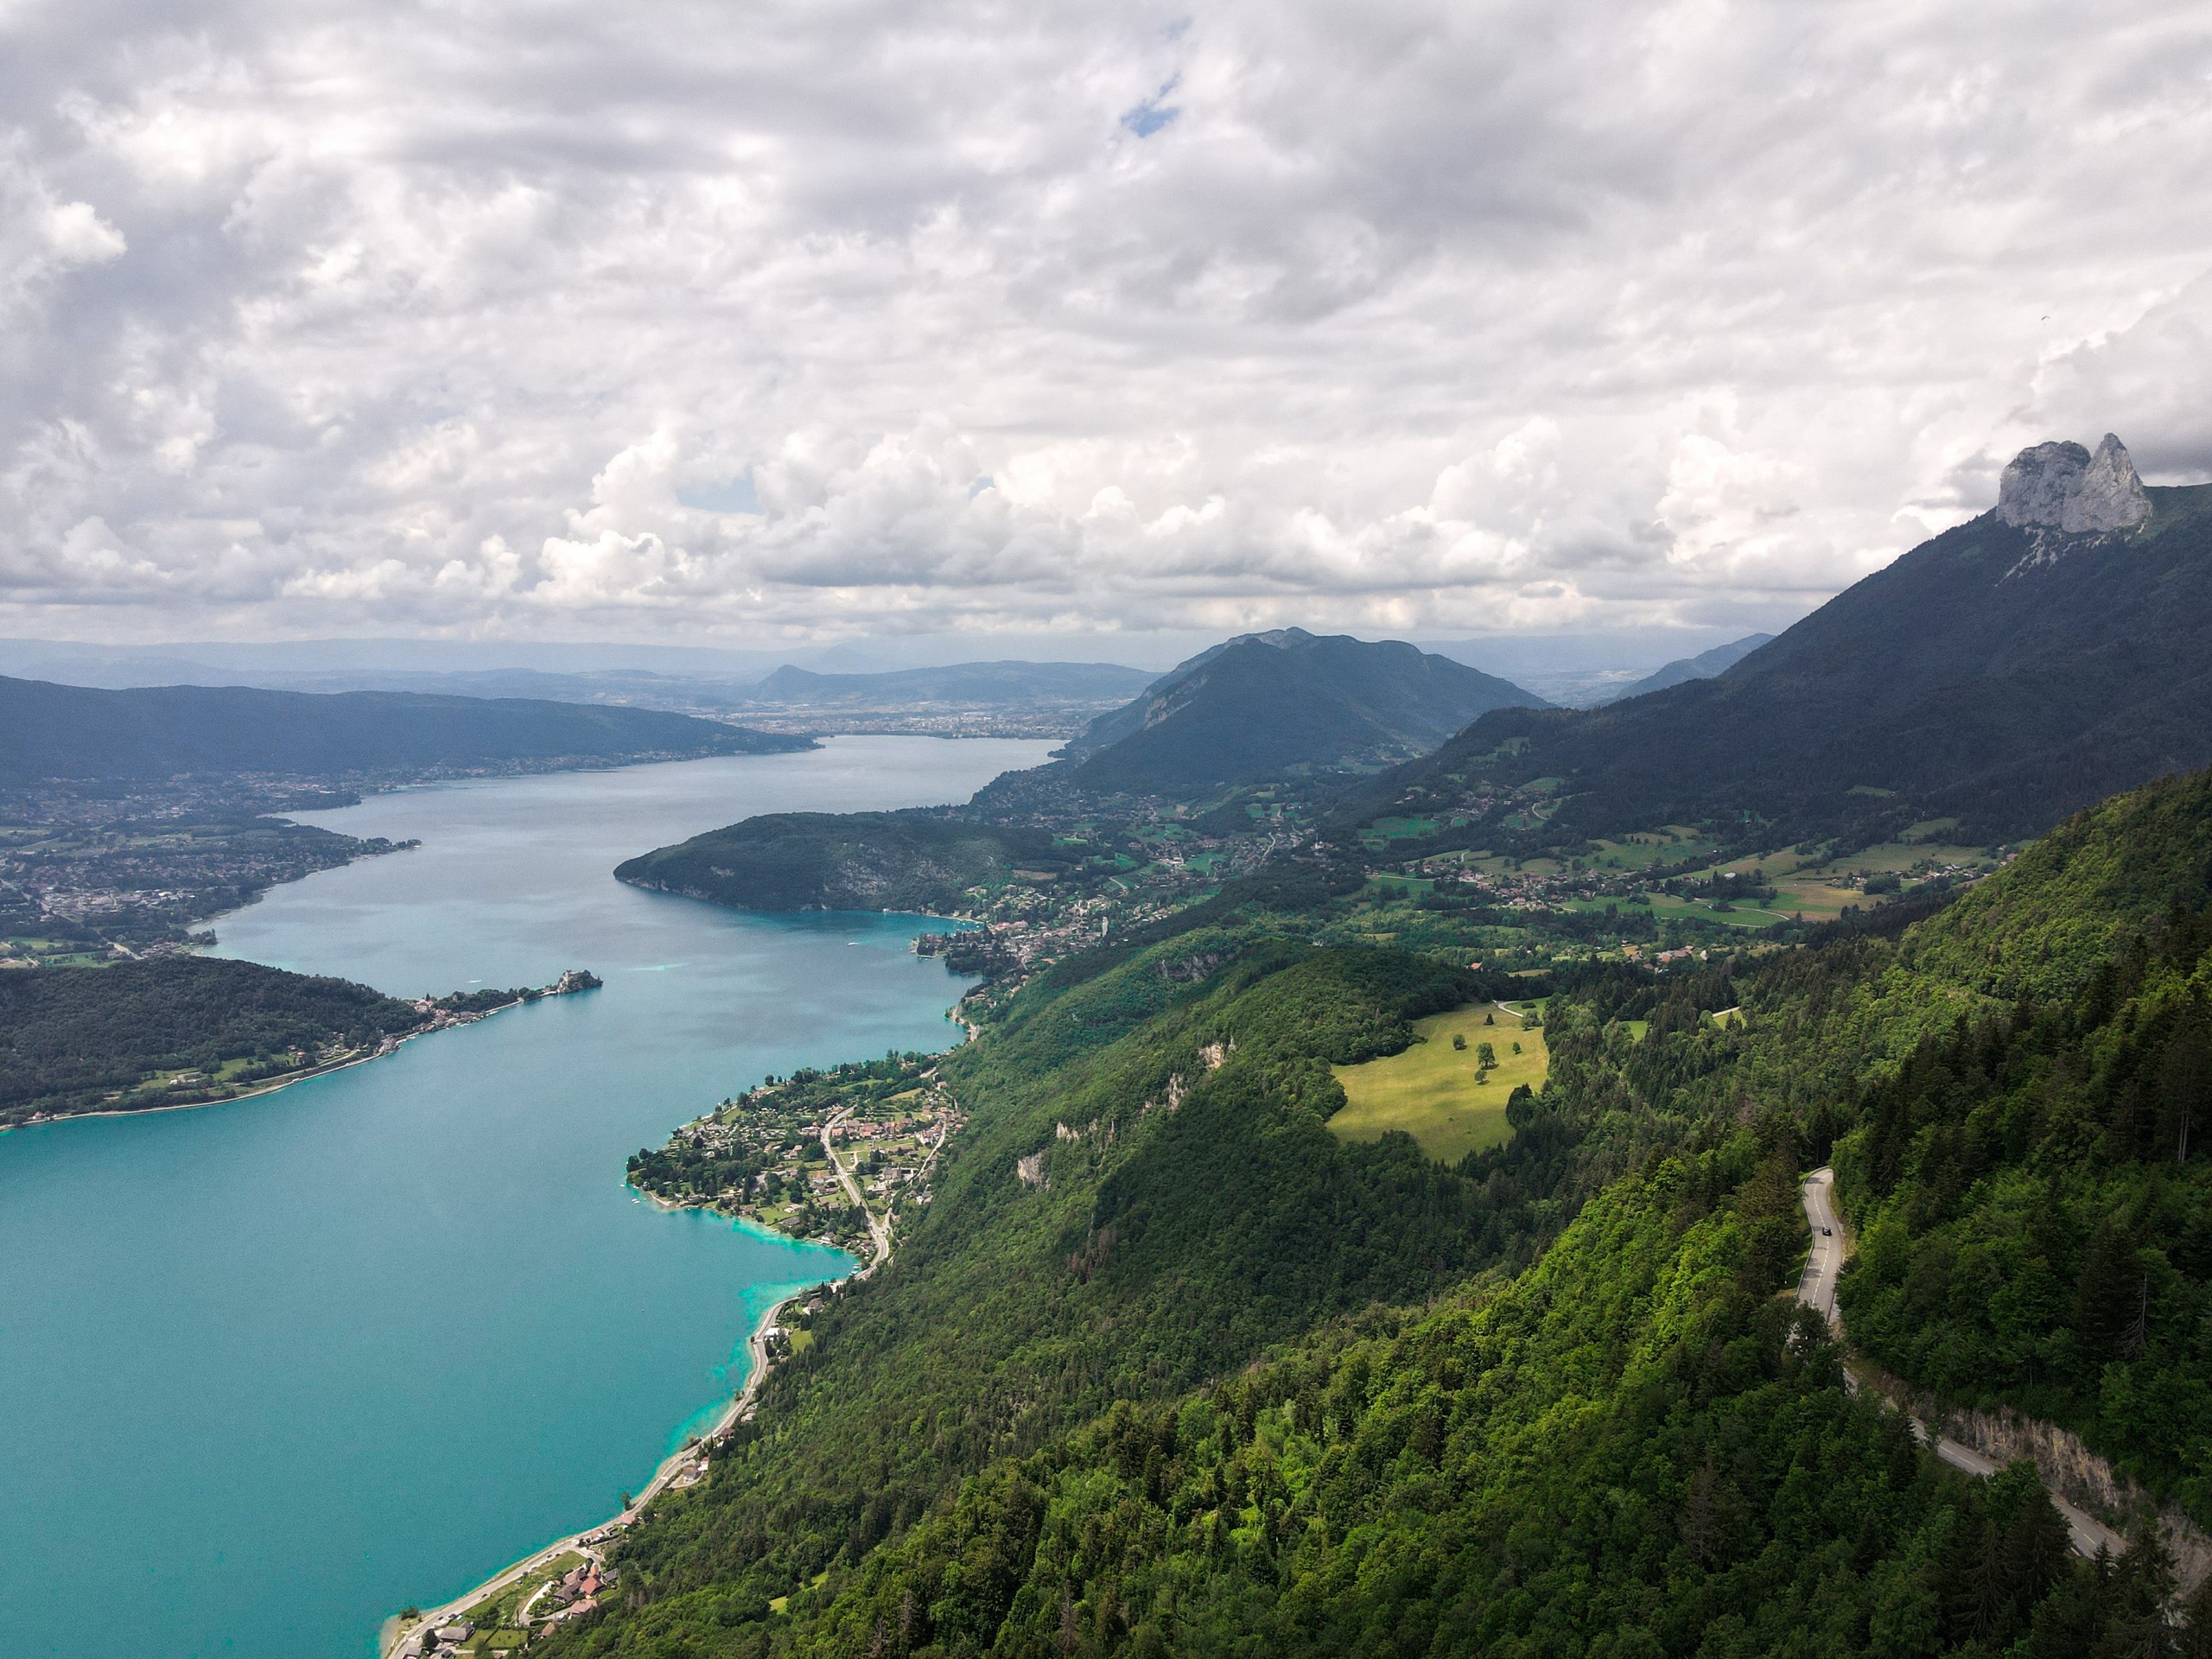 Looking at Annecy Lake from the above